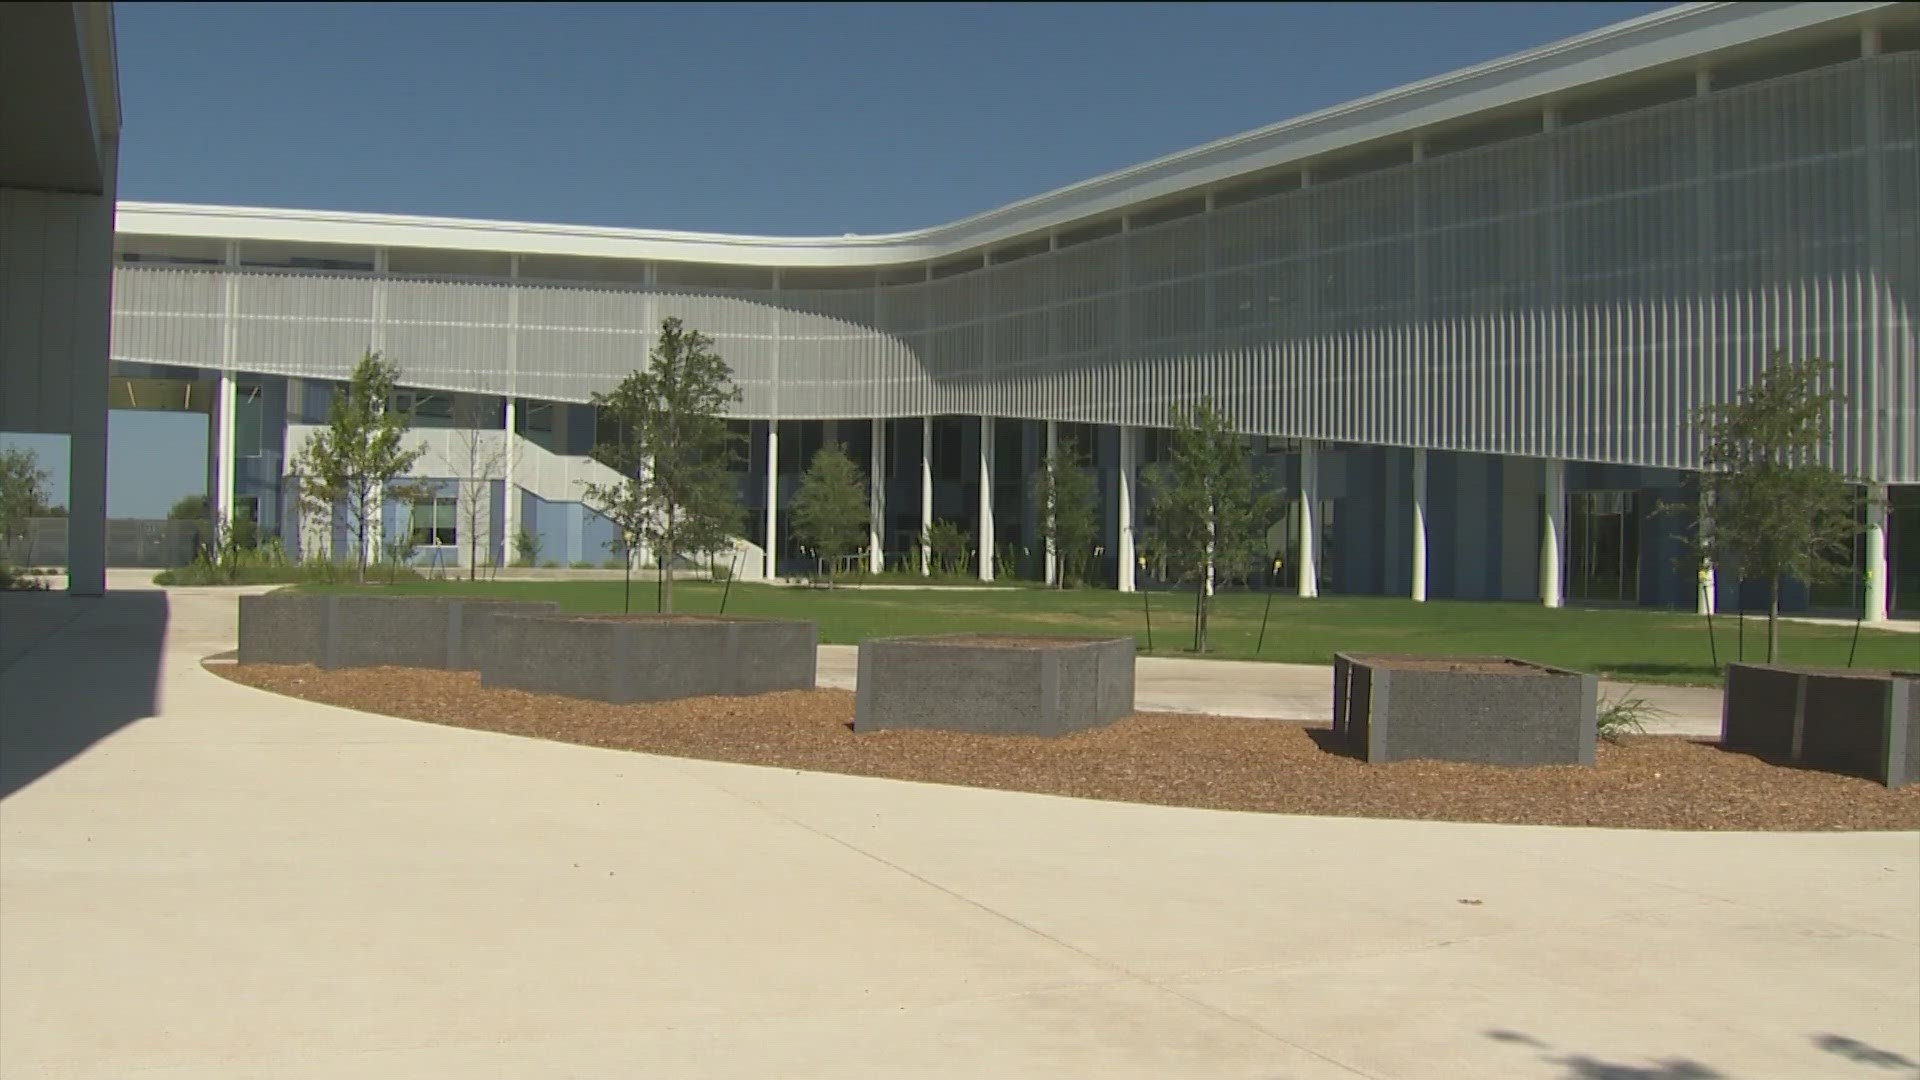 Dr. General Marshall Middle School will open its doors for the first time Monday. KVUE's Eric Pointer got a look inside and shows us what students can expect.